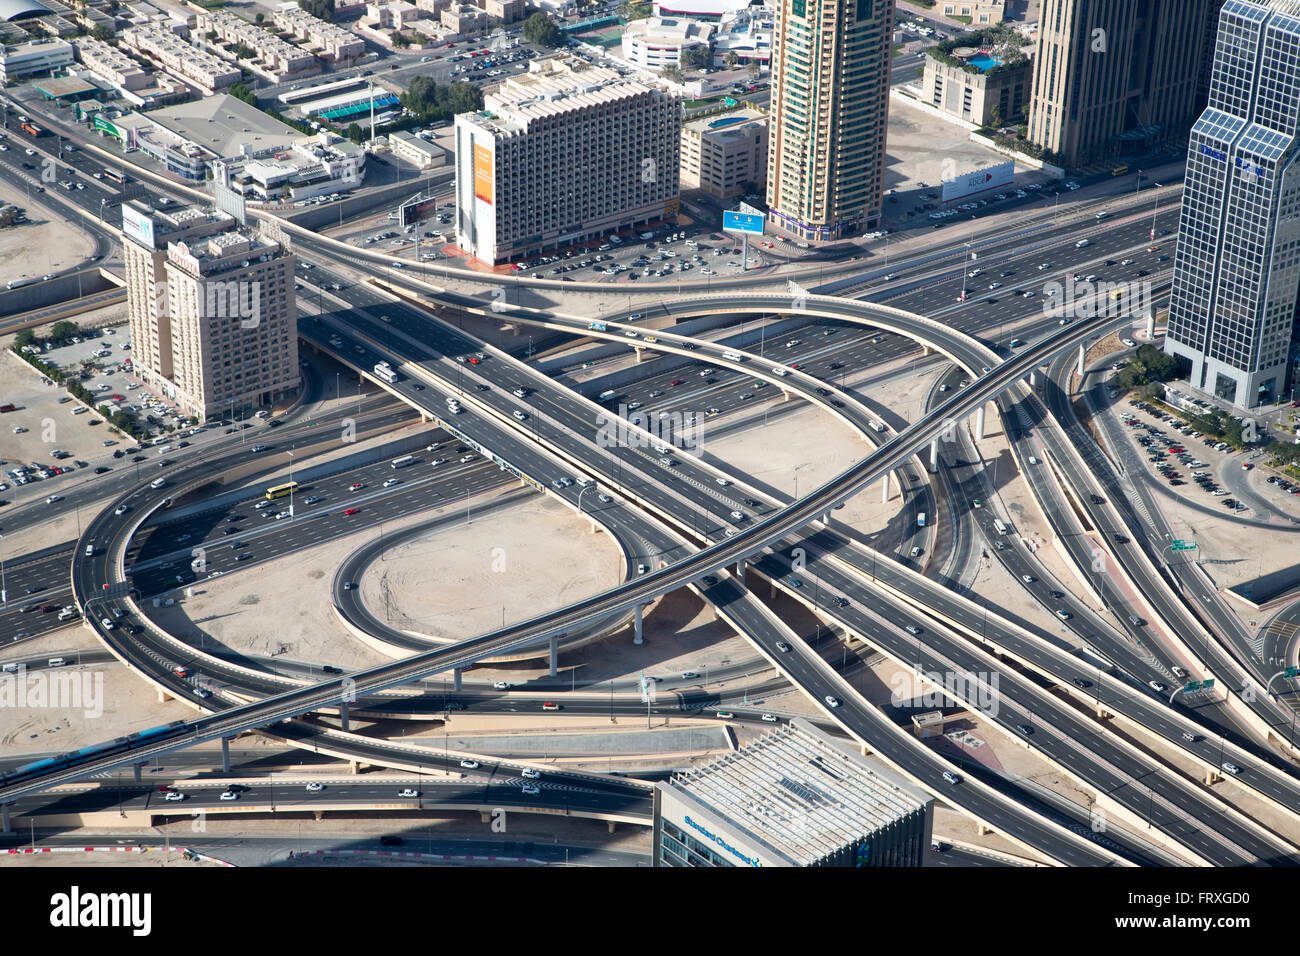 View of traffic interchange 1 of Sheikh Zayed Road and Doha Street from At The Top observation deck on level 124 of Burj Khalifa tower, Dubai, United Arab Emirates Stock Photo